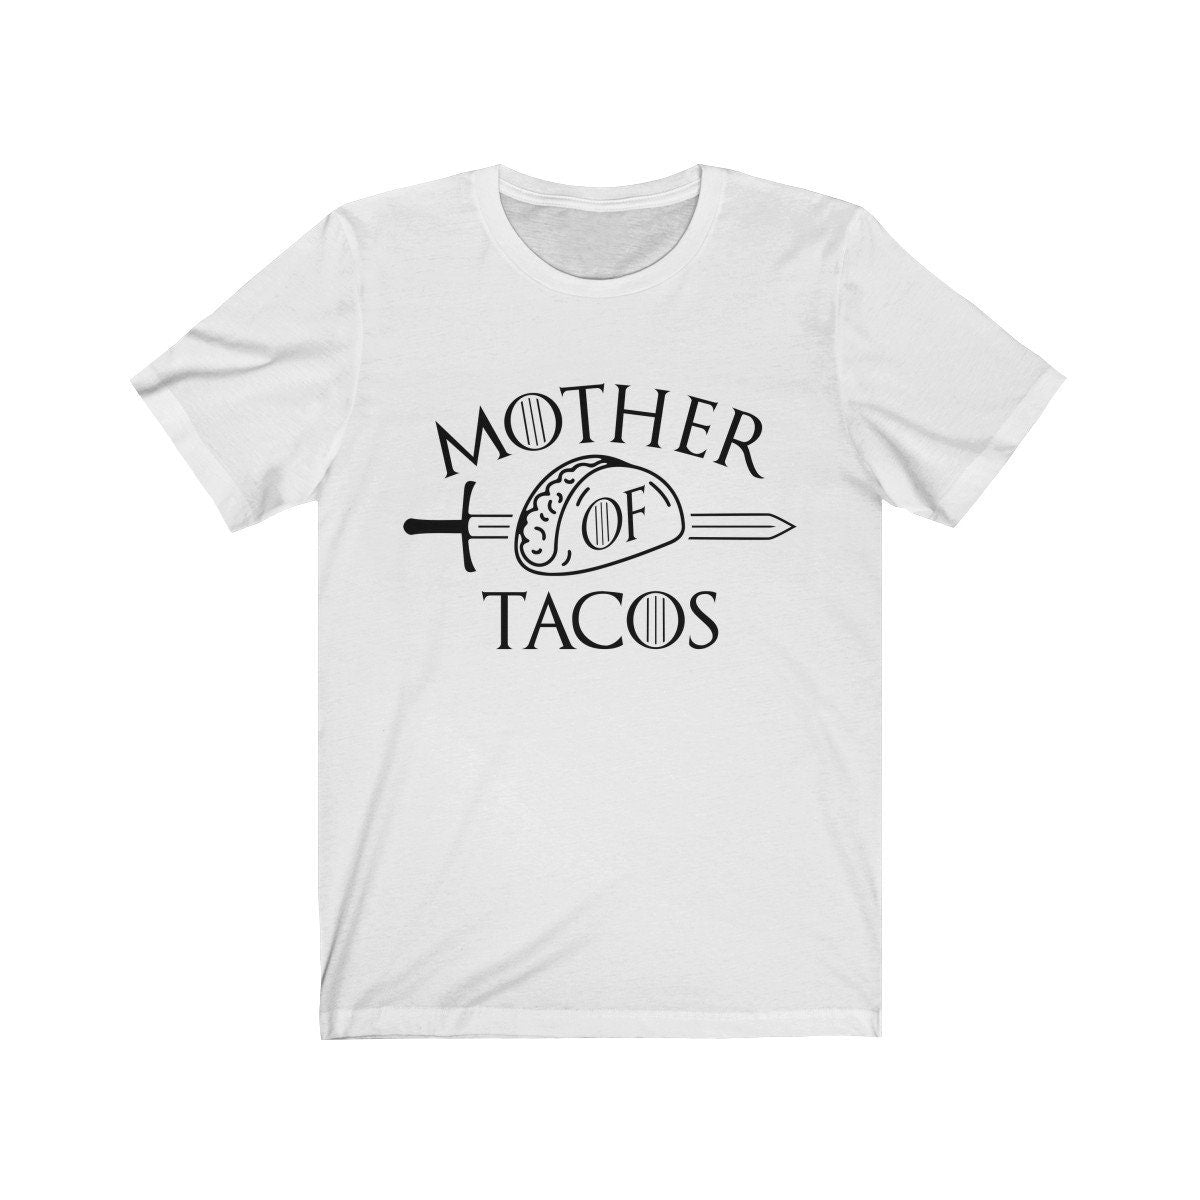 Mother of tacos gift t-shirt for mom or wife, taco lover t-shirt for women